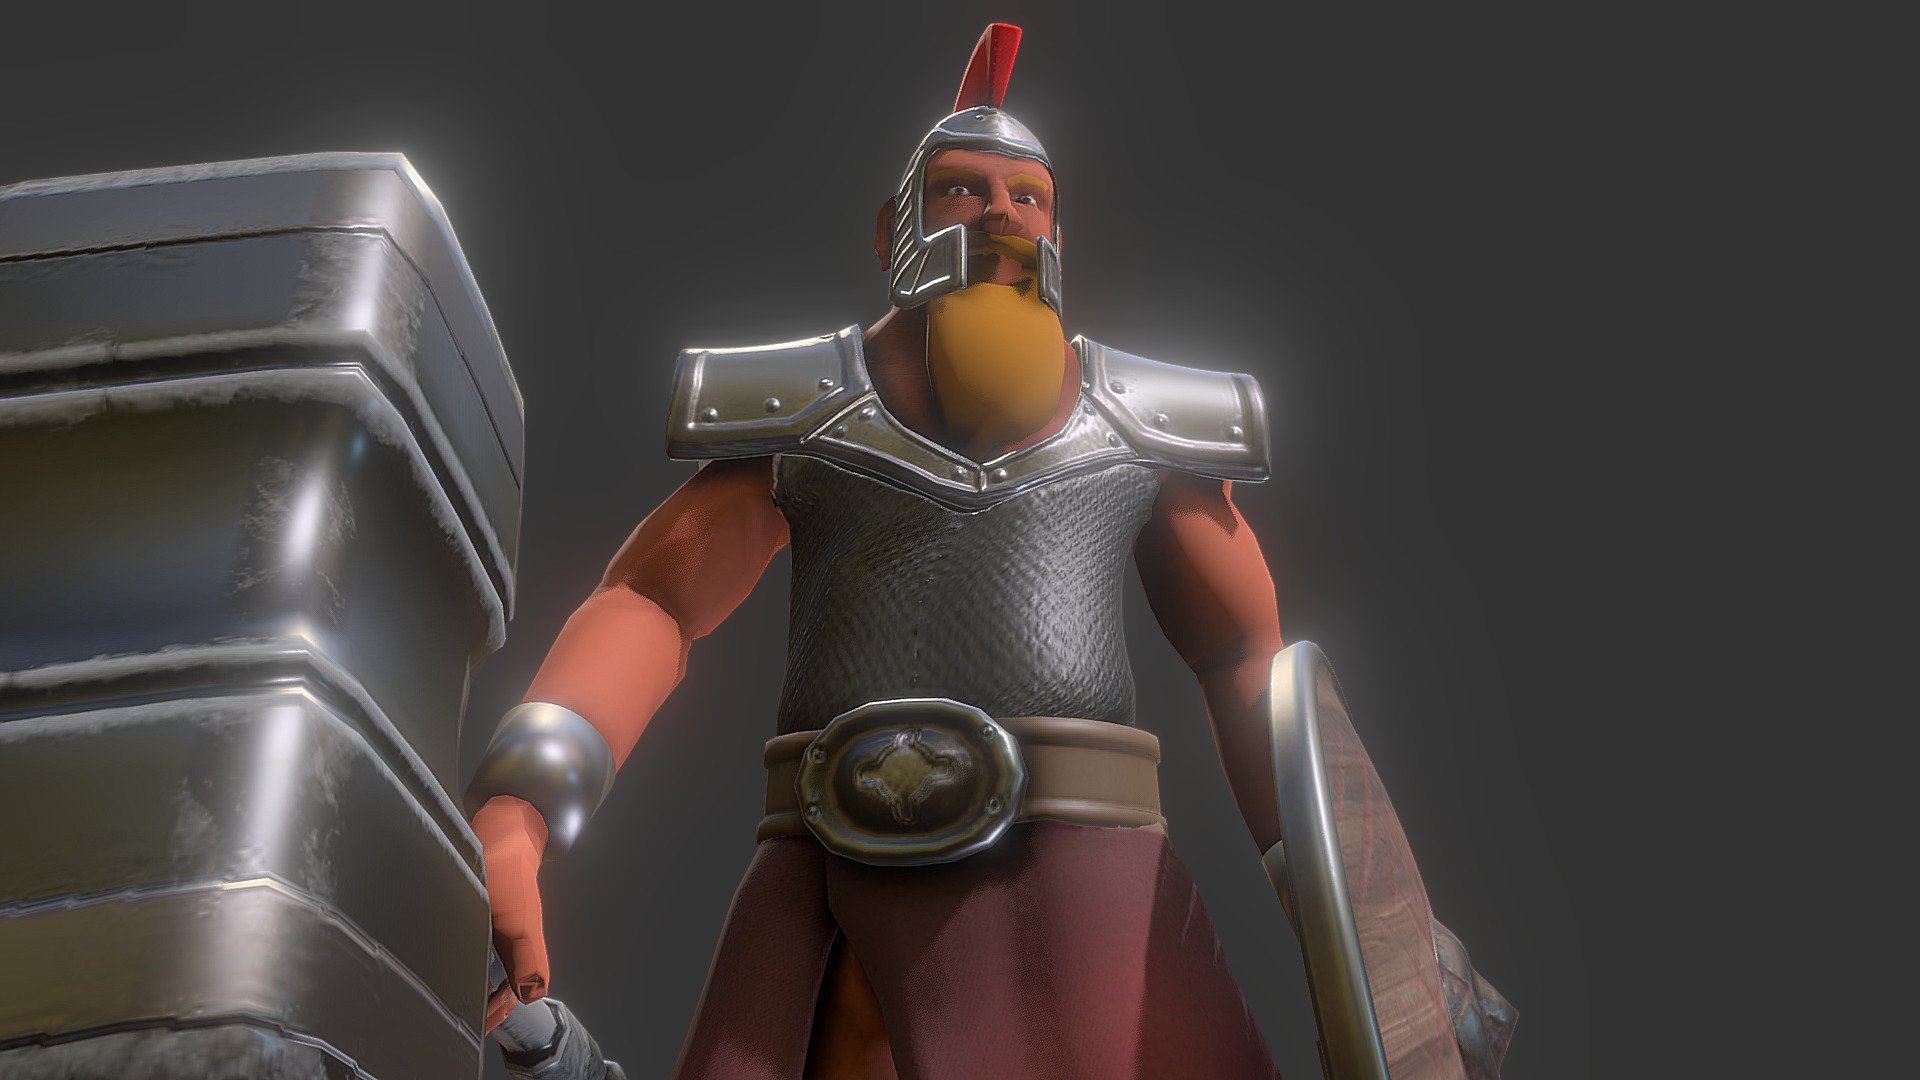 Medium Resolution Model of a Dwarven Soldier.  Designed using Blender 2.8 and Substance Painter.  This model is not rigged but can be used in video games and Illustrative purposes as well as concept art.  The Topology has been recreated from a high resolution model to keep file size to a minimum while maintaining high quality in detailed areas.  This will allow very smooth real time rendering in any engine of your choice 3d model